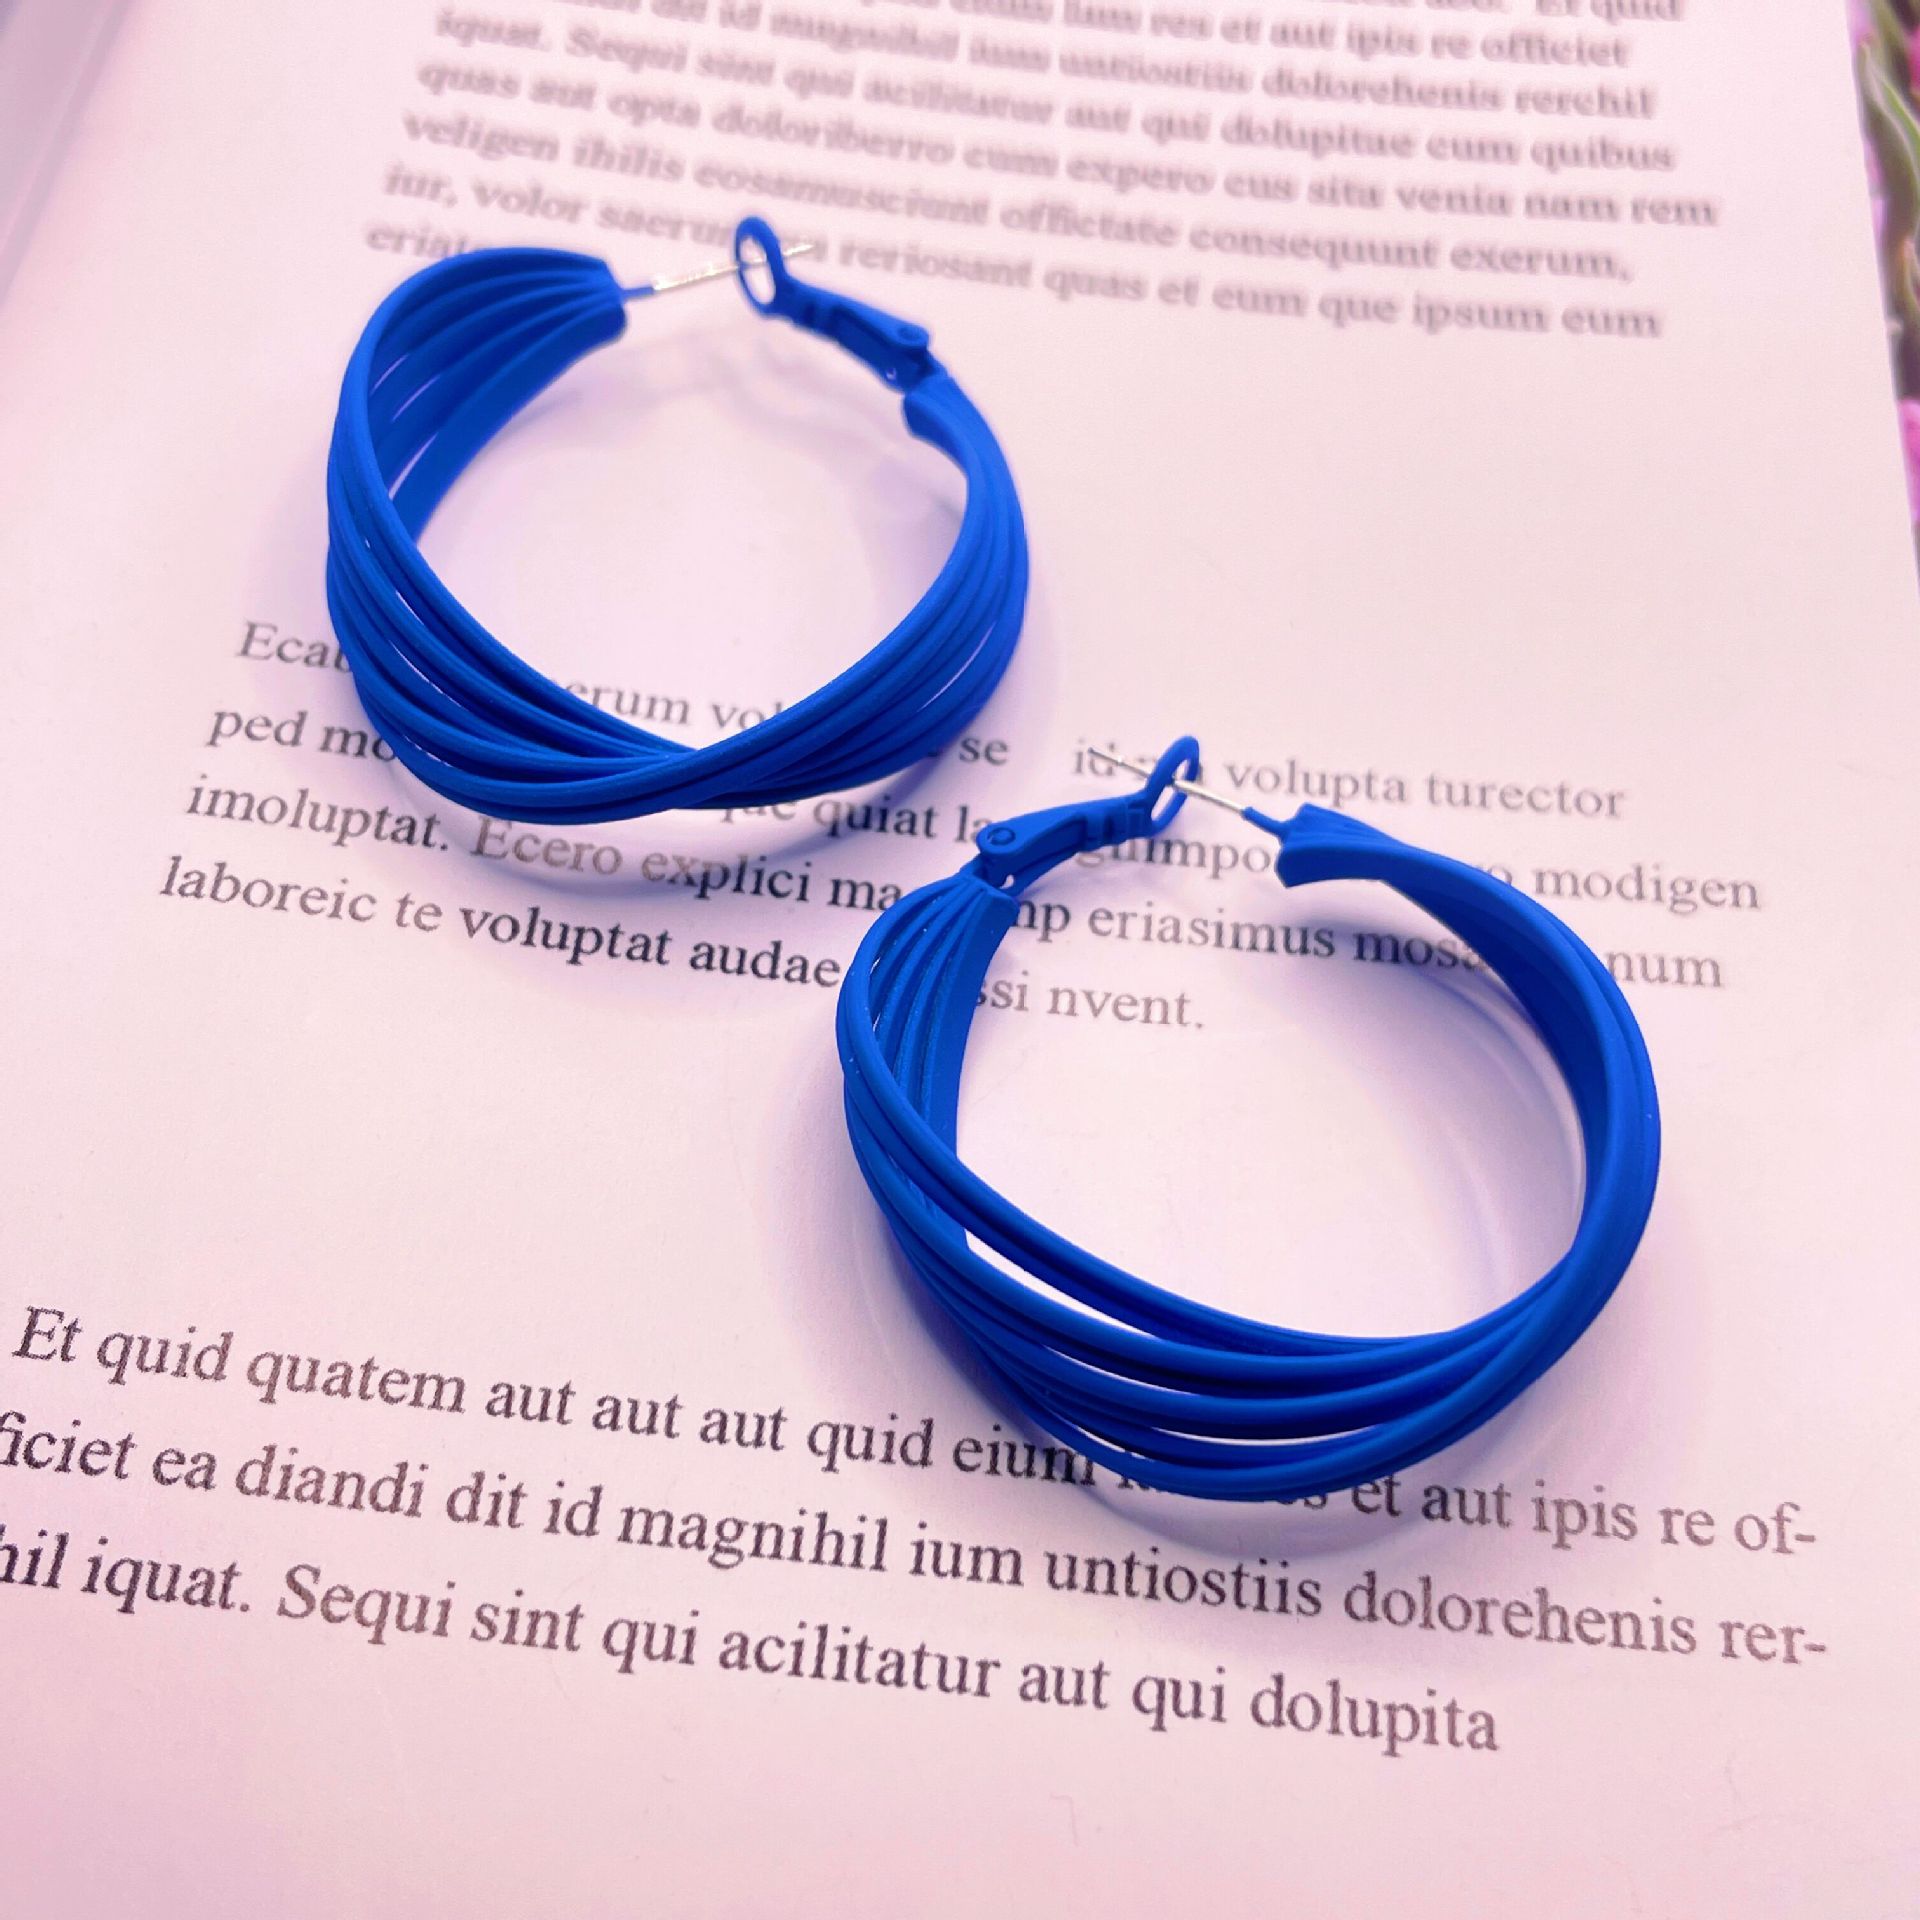 Hong Kong Style Retro Klein Blue Ear Ring Elegant Blue Earrings Affordable Luxury Fashion Earrings High-Key Dignified Simple Clay